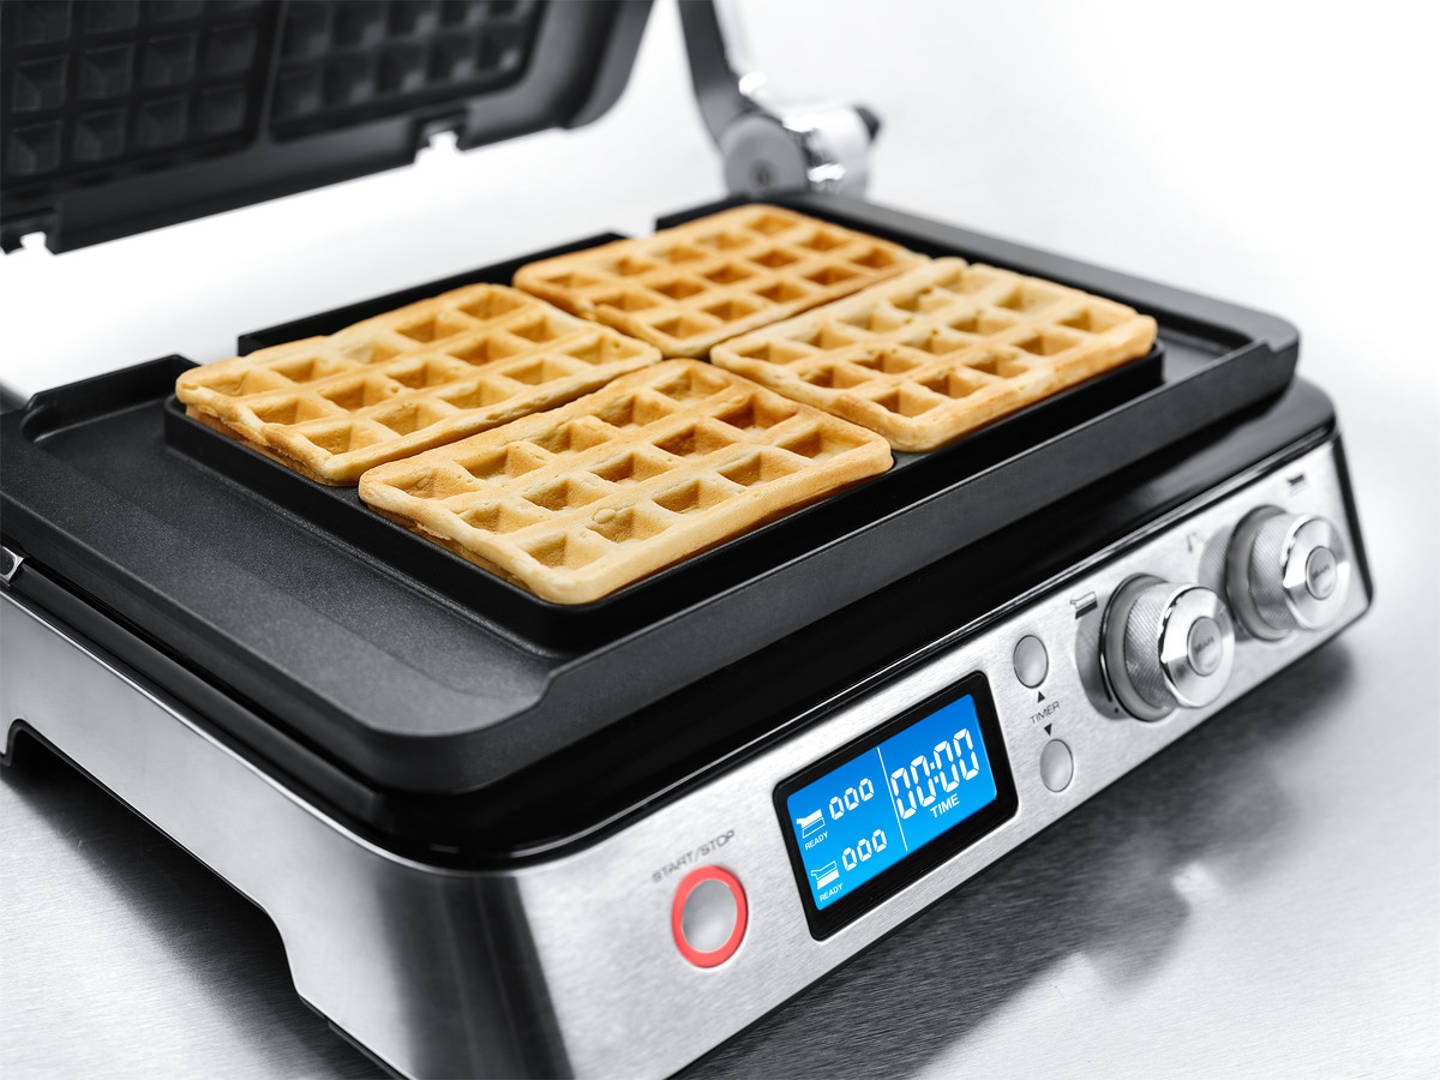 Grills, Griddles + Waffle Makers